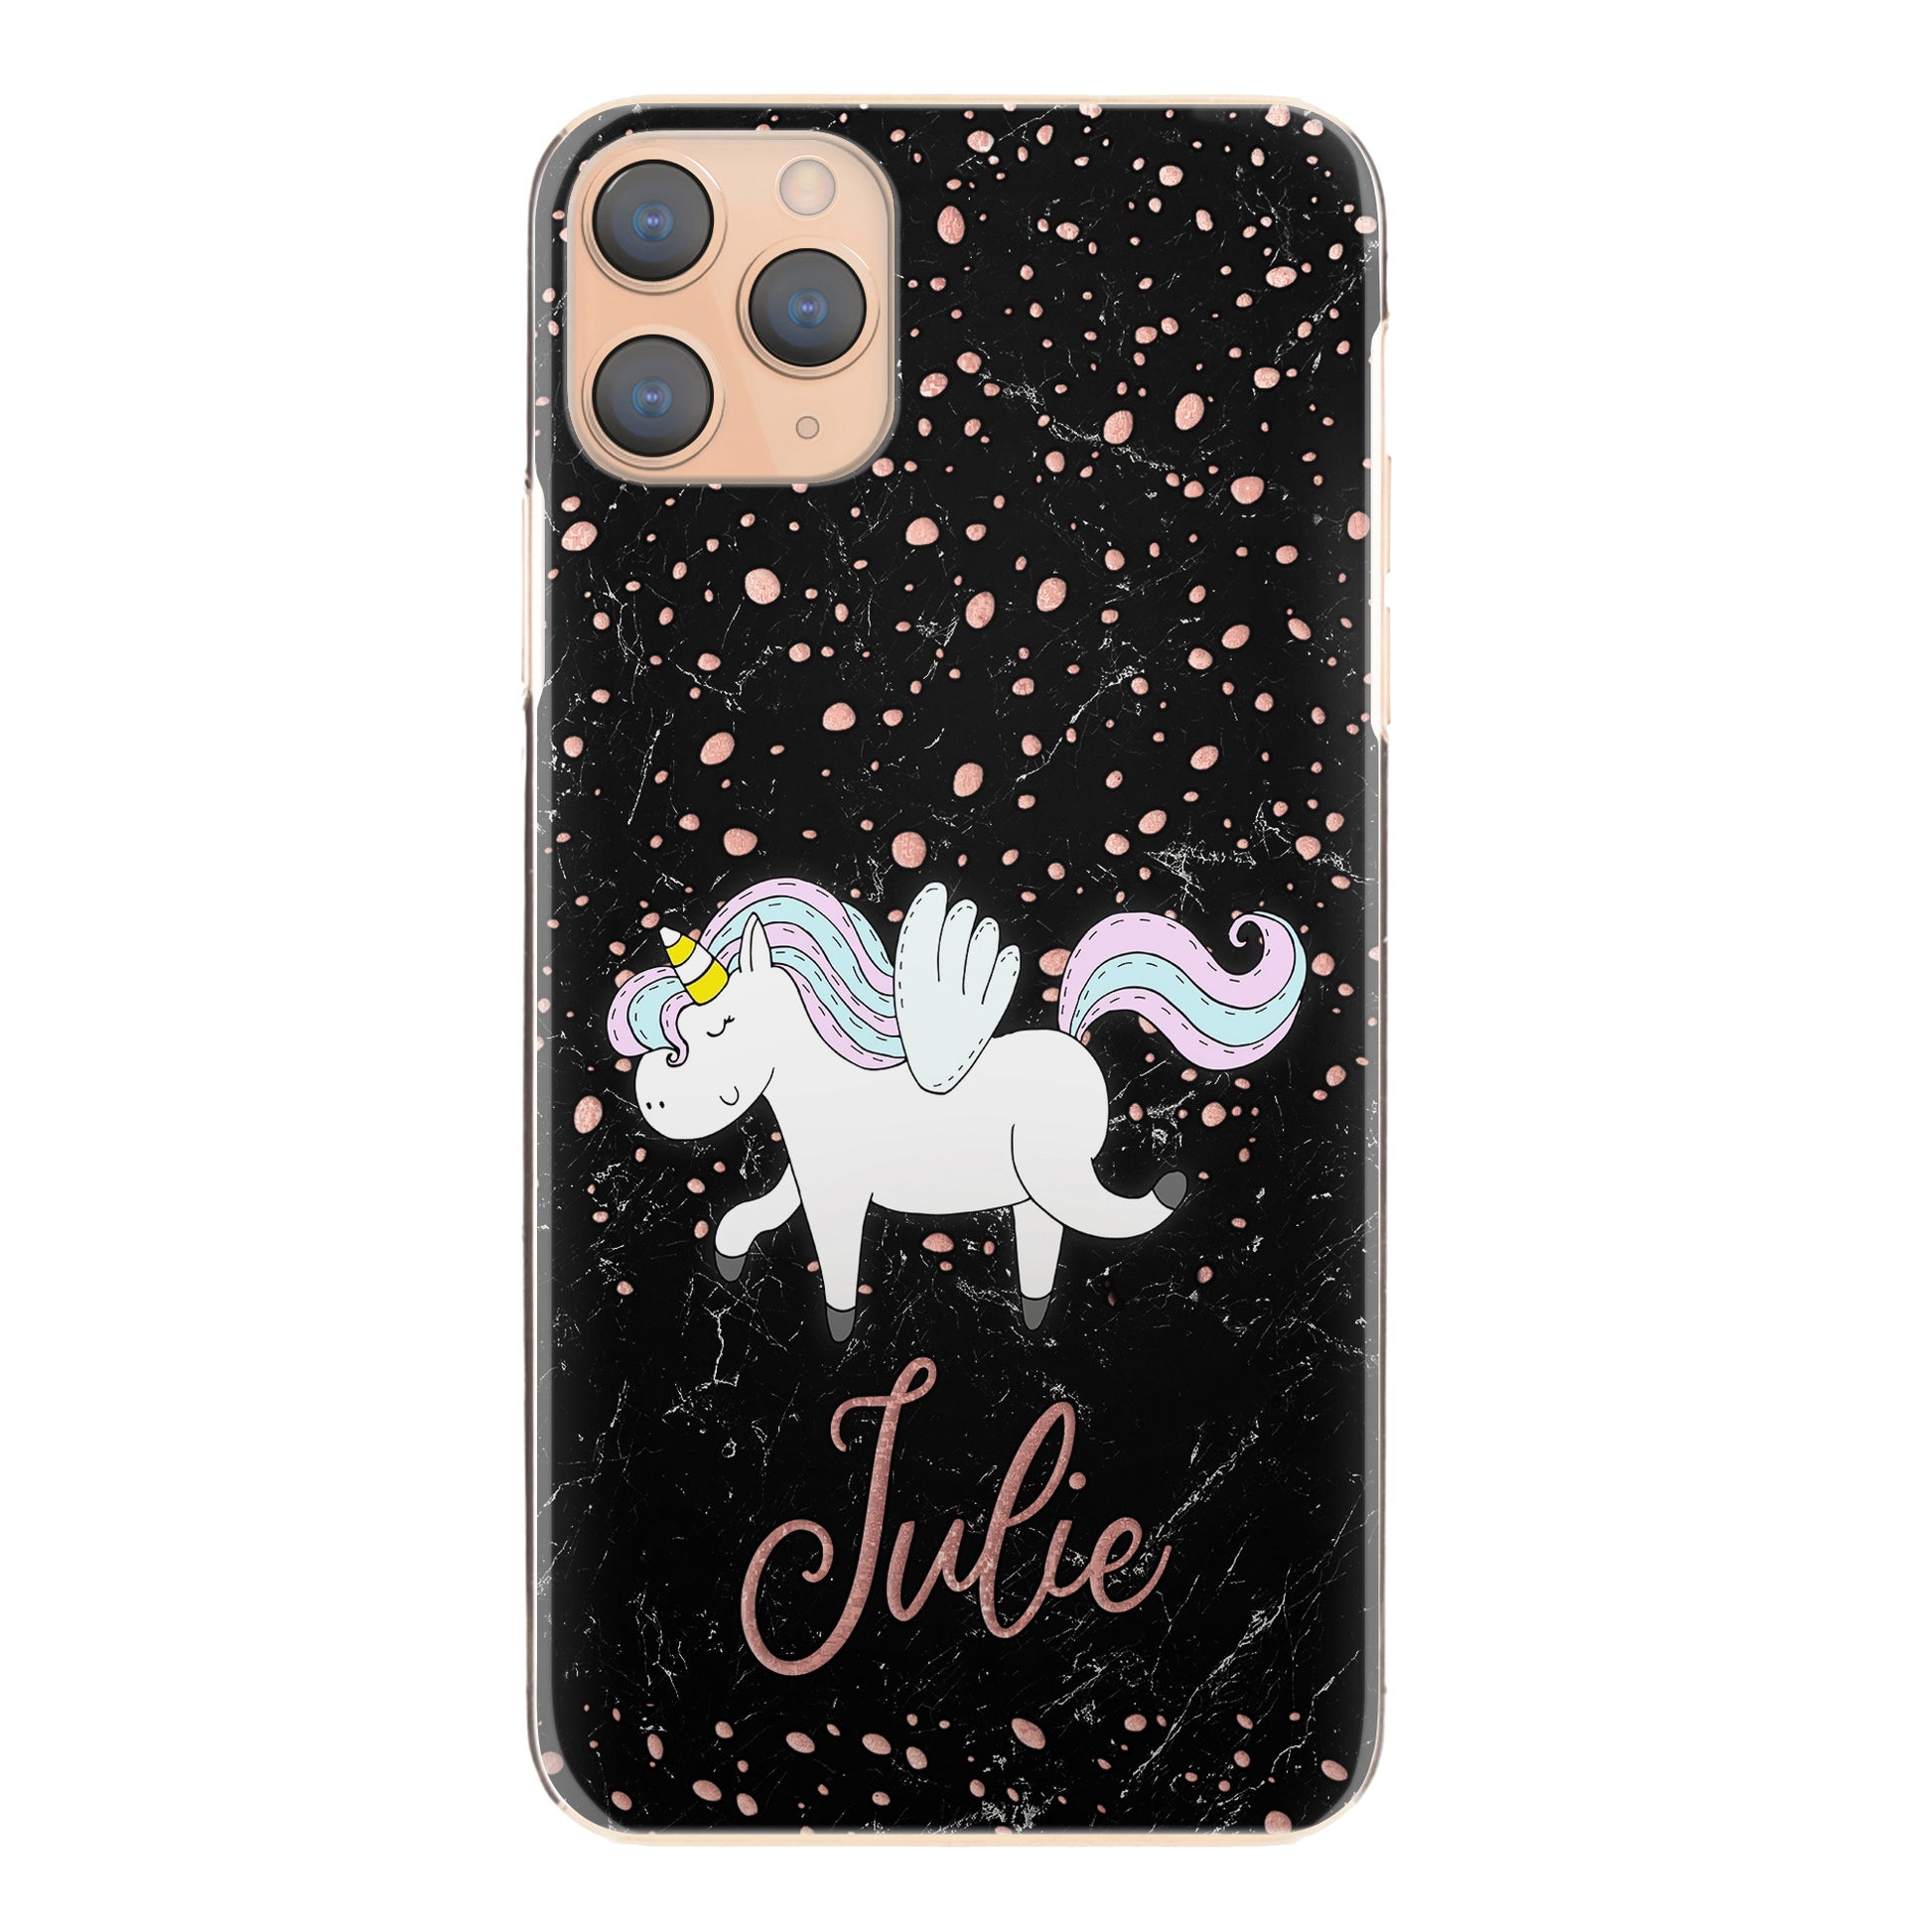 Personalised Google Phone Hard Case with Winged Unicorn and Pink Text on Black Marble